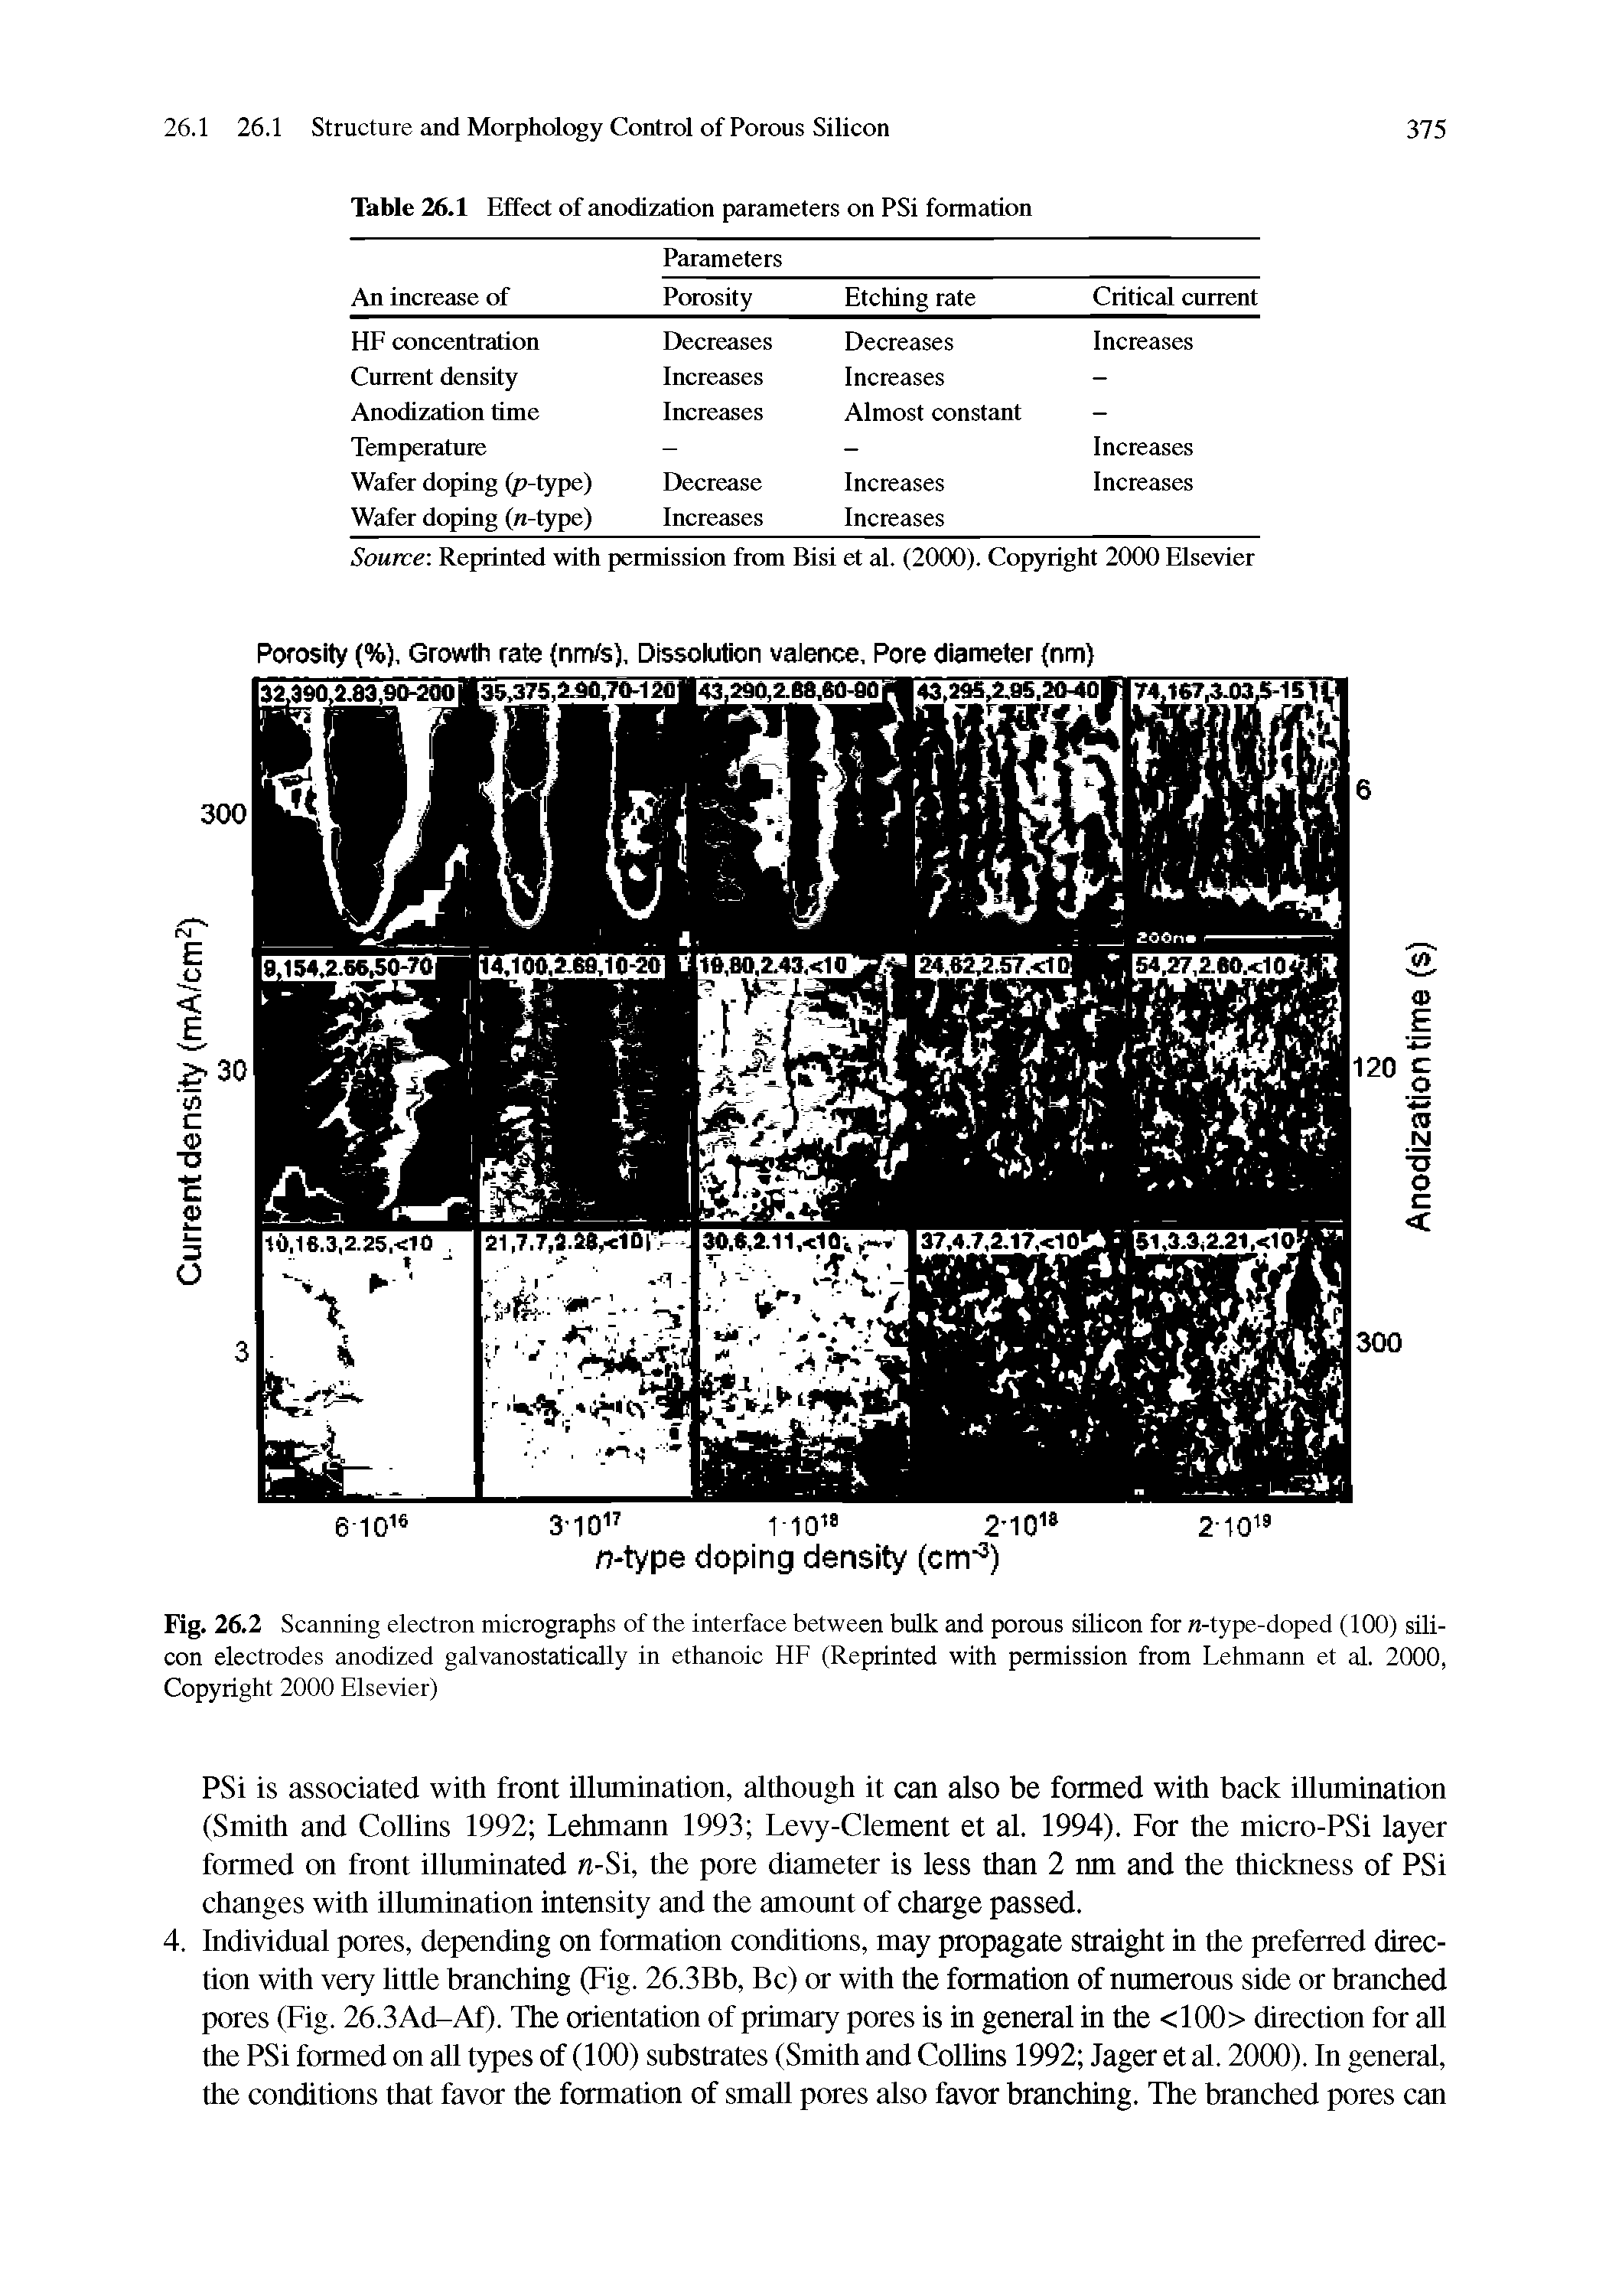 Fig. 26.2 Scanning electron micrographs of the interface between bulk and porous silicon for n-type-doped (100) silicon electrodes anodized galvanostaticaUy in ethanoic HE (Reprinted with permission from Lehmann et al. 2000, Copyright 2000 Elsevier)...